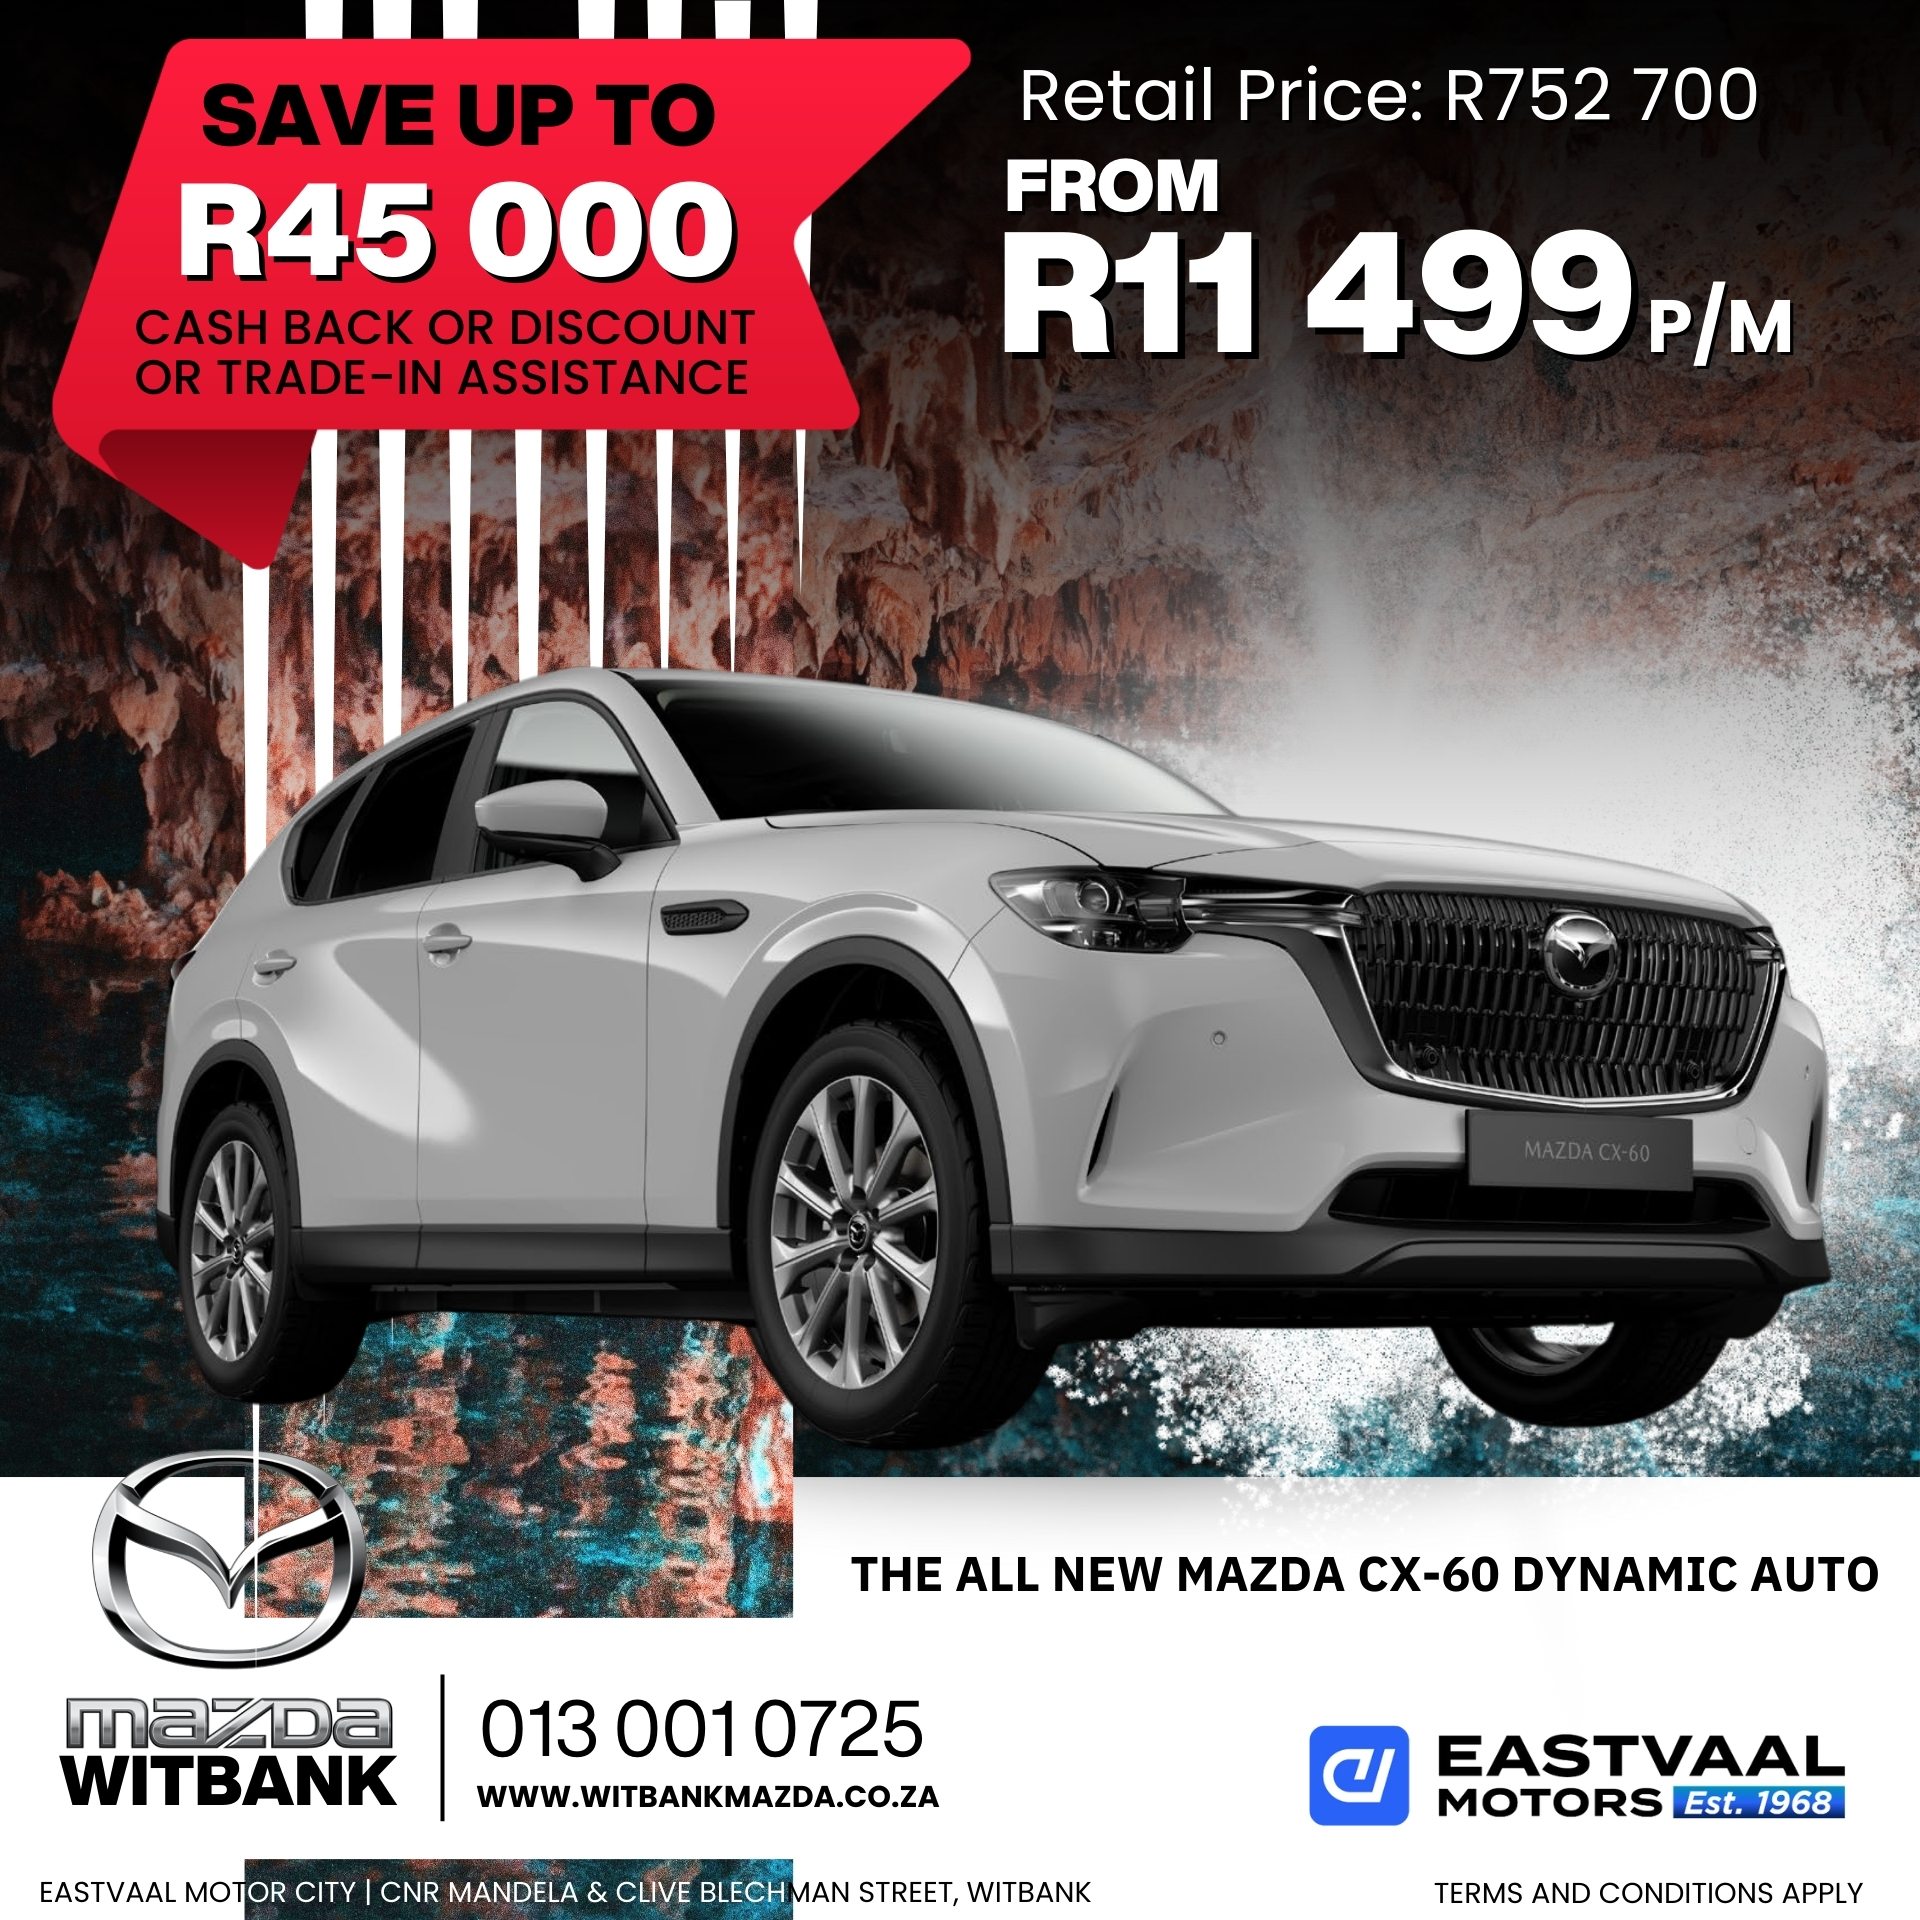 Drive into the future with a brand new Mazda this July! Visit Eastvaal Motor City and discover unbeatable deals. image from 